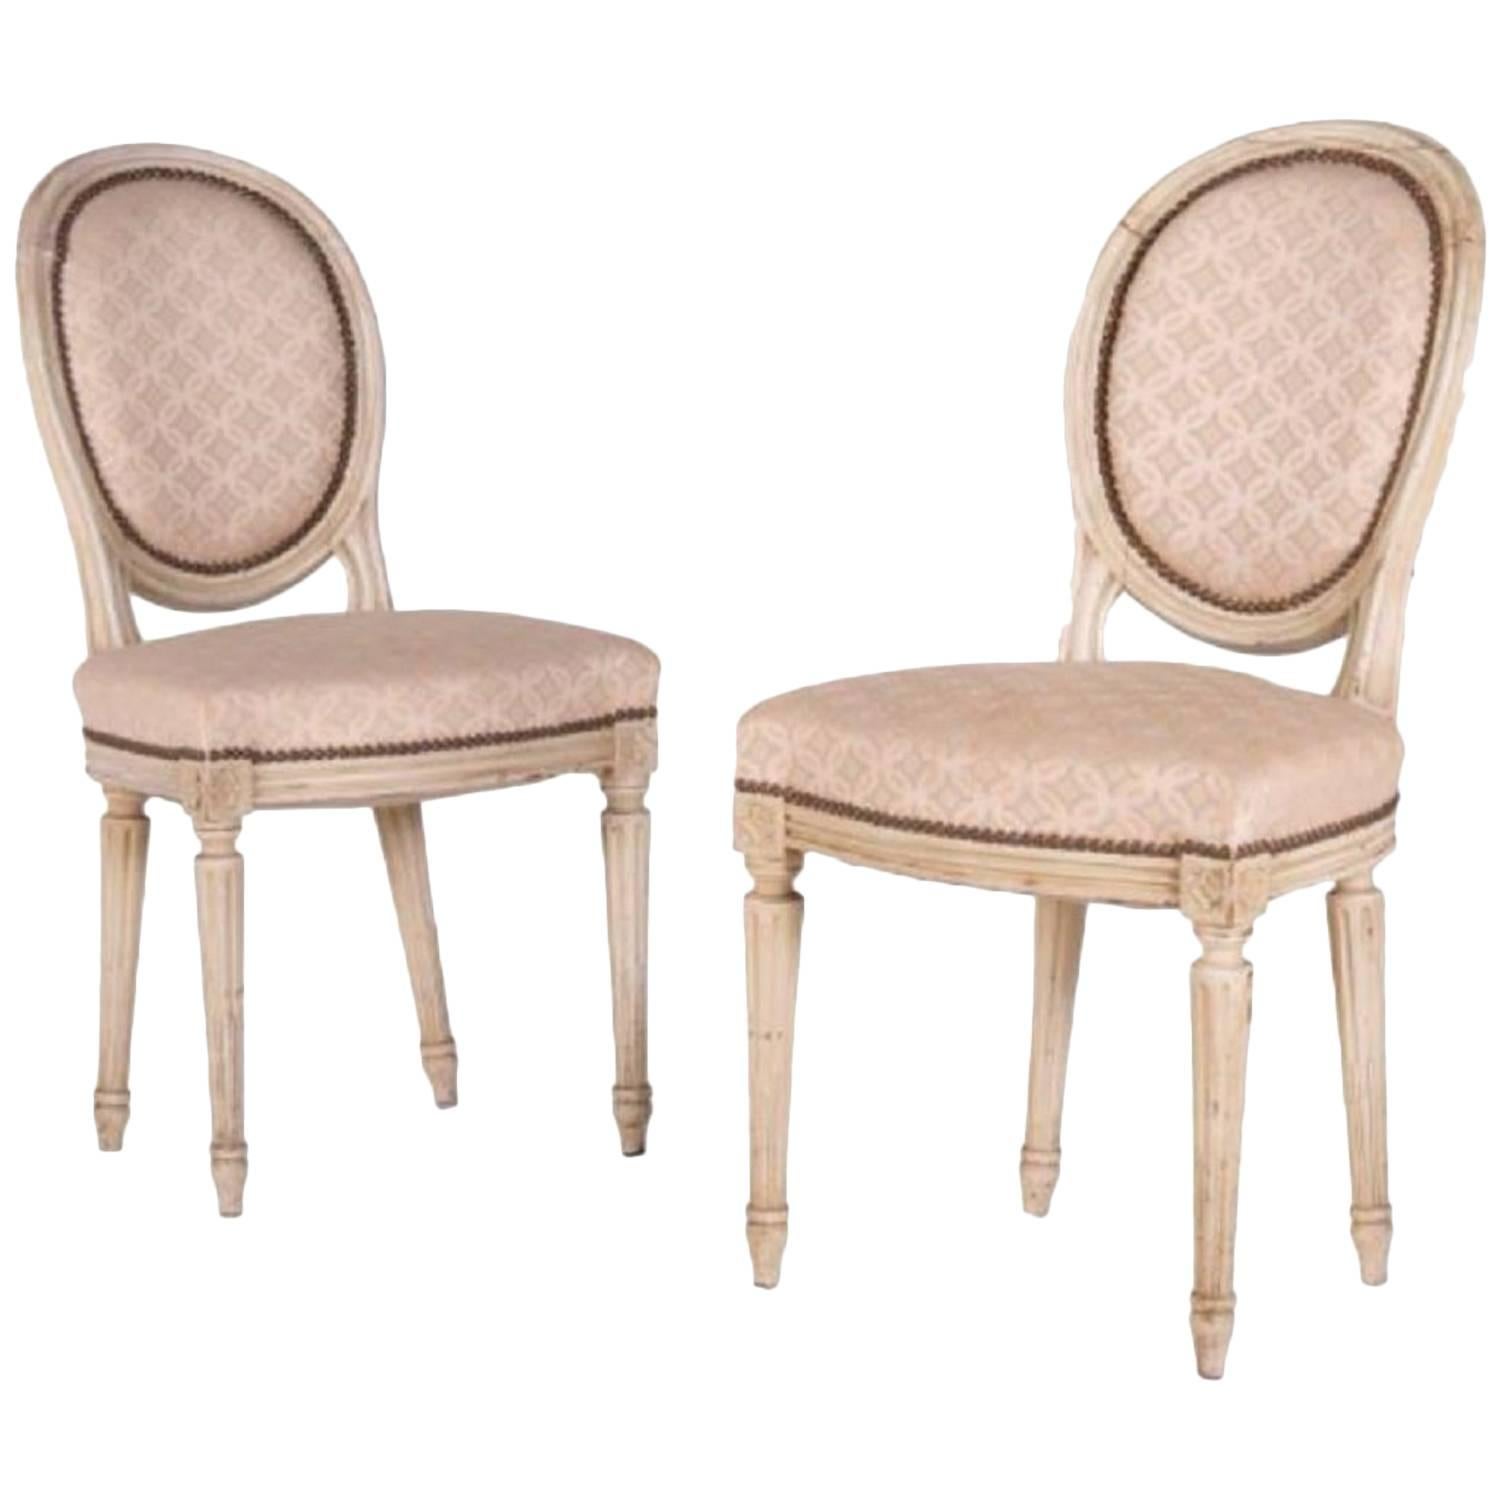 Two Elegant Antique Chairs from France in Louis XVI Style, circa 1860